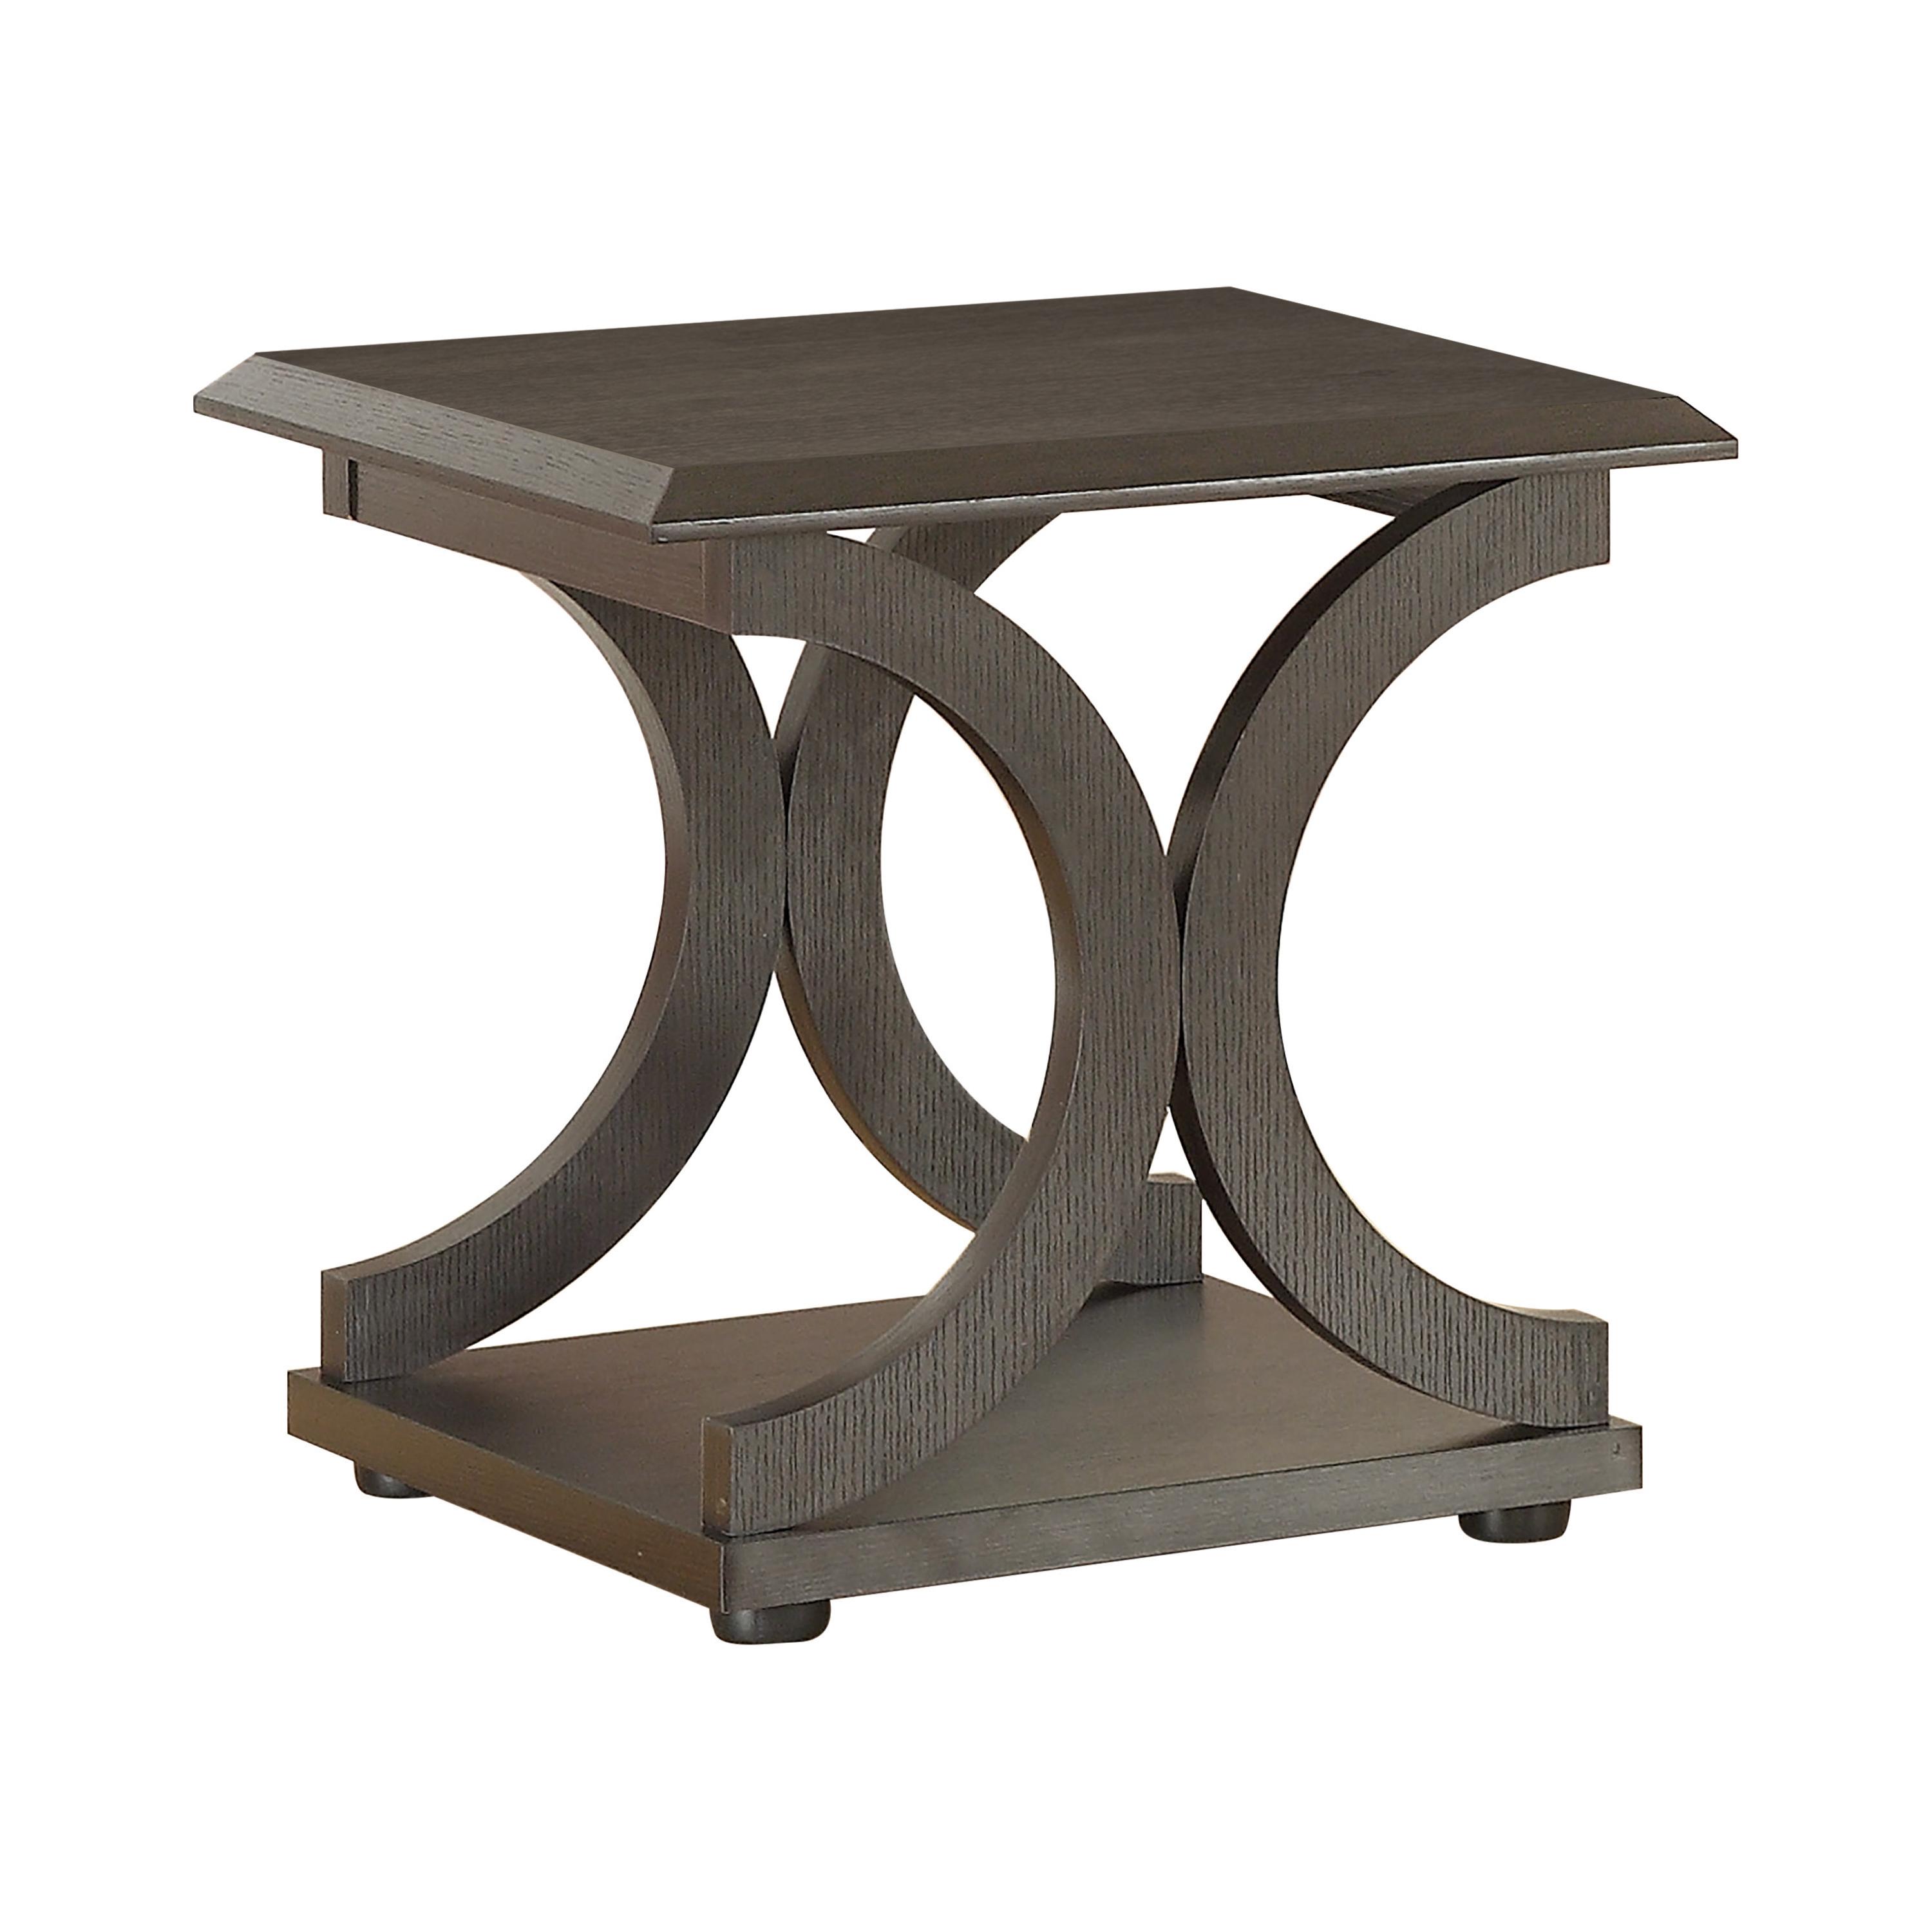 Transitional End Table 703147 703147 in Cappuccino 